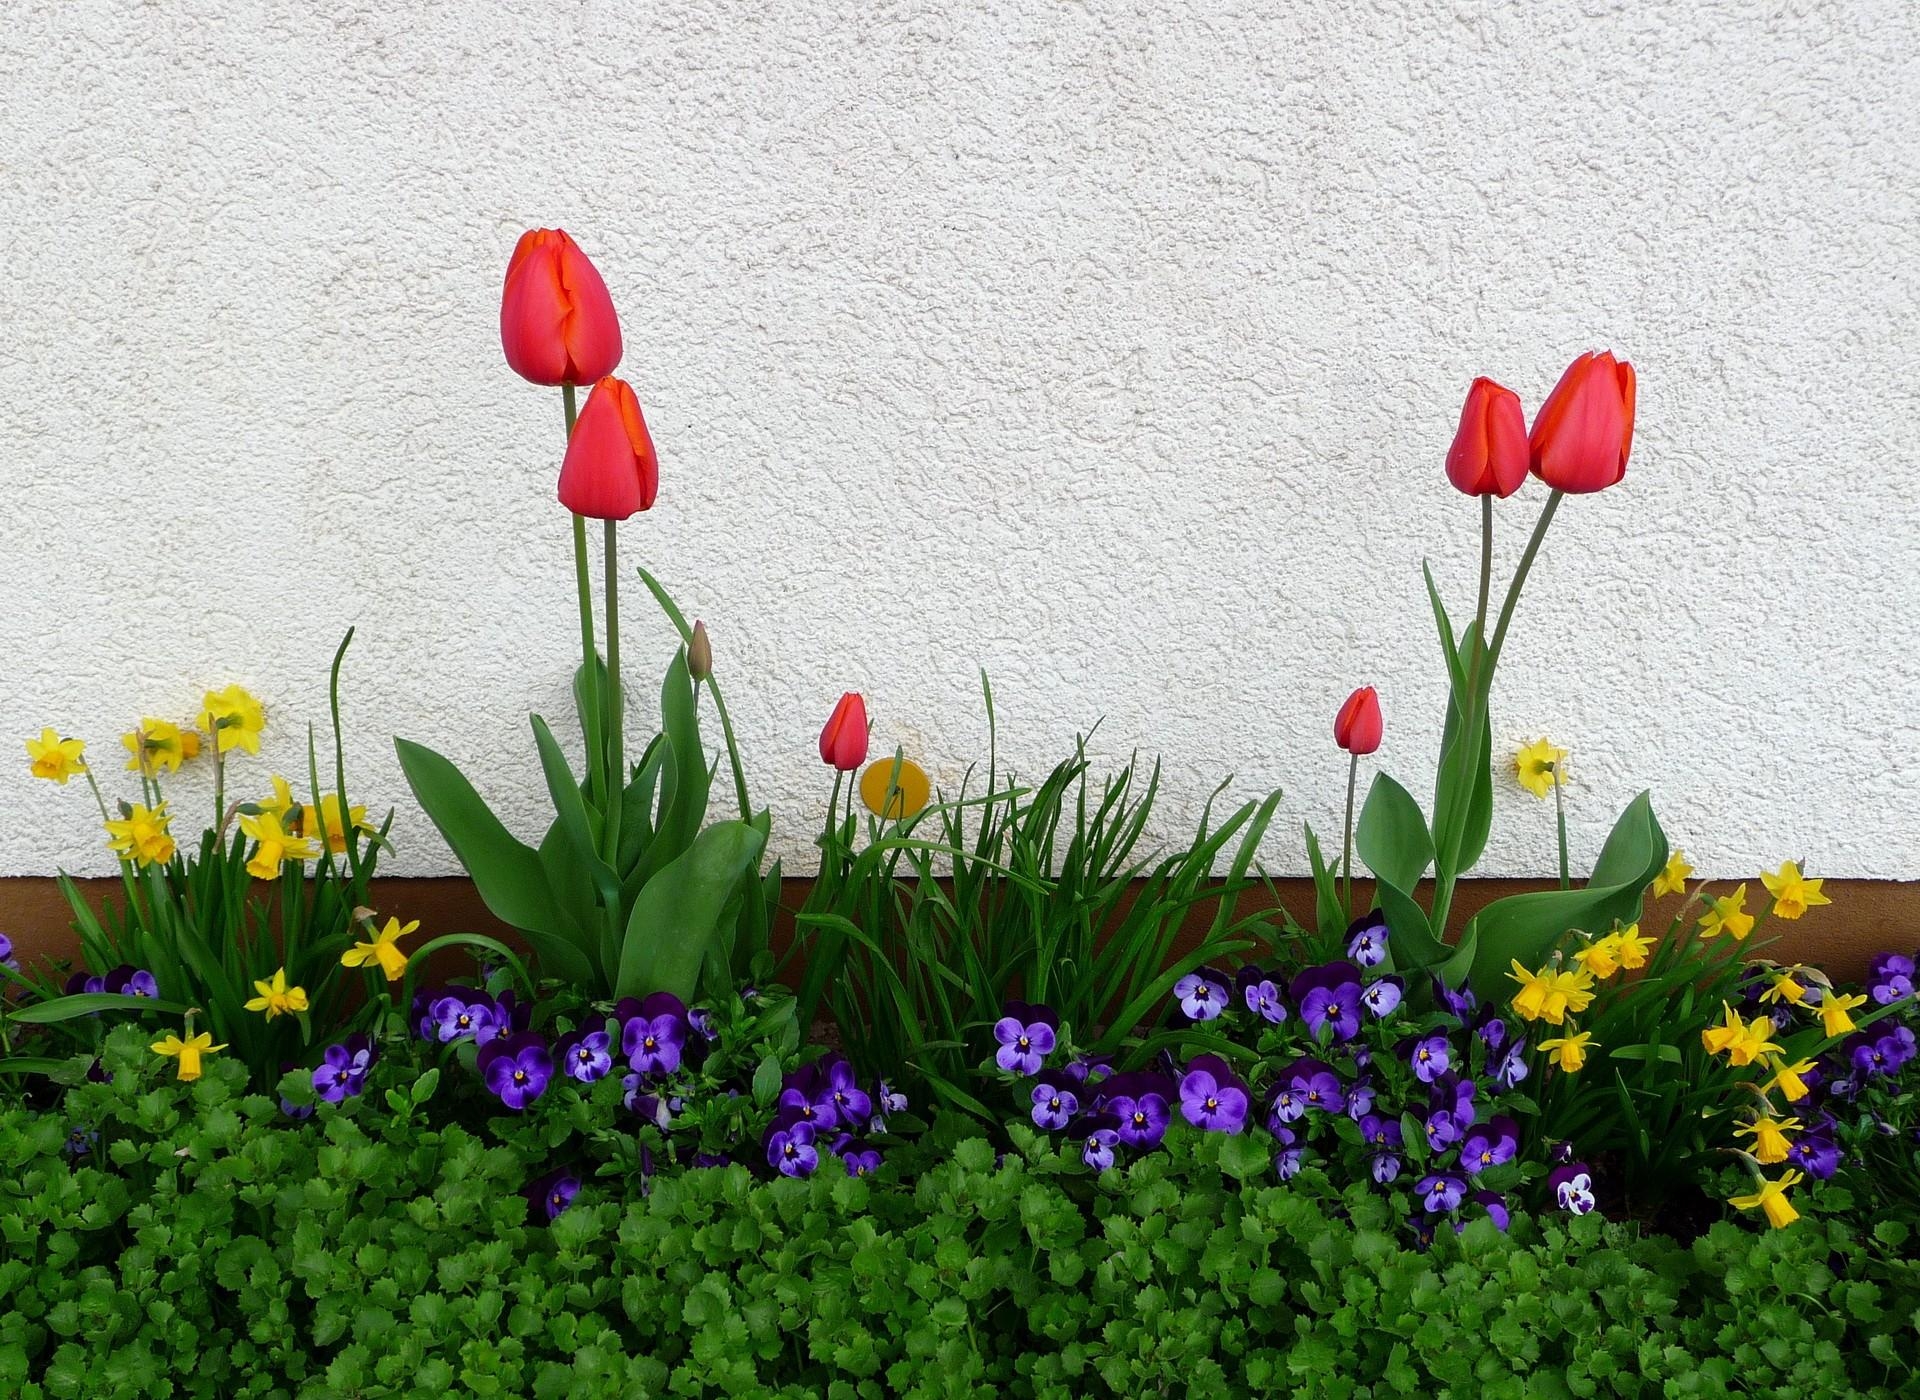 tulips, flowers, pansies, narcissussi, greens, flower bed, flowerbed, wall, spring